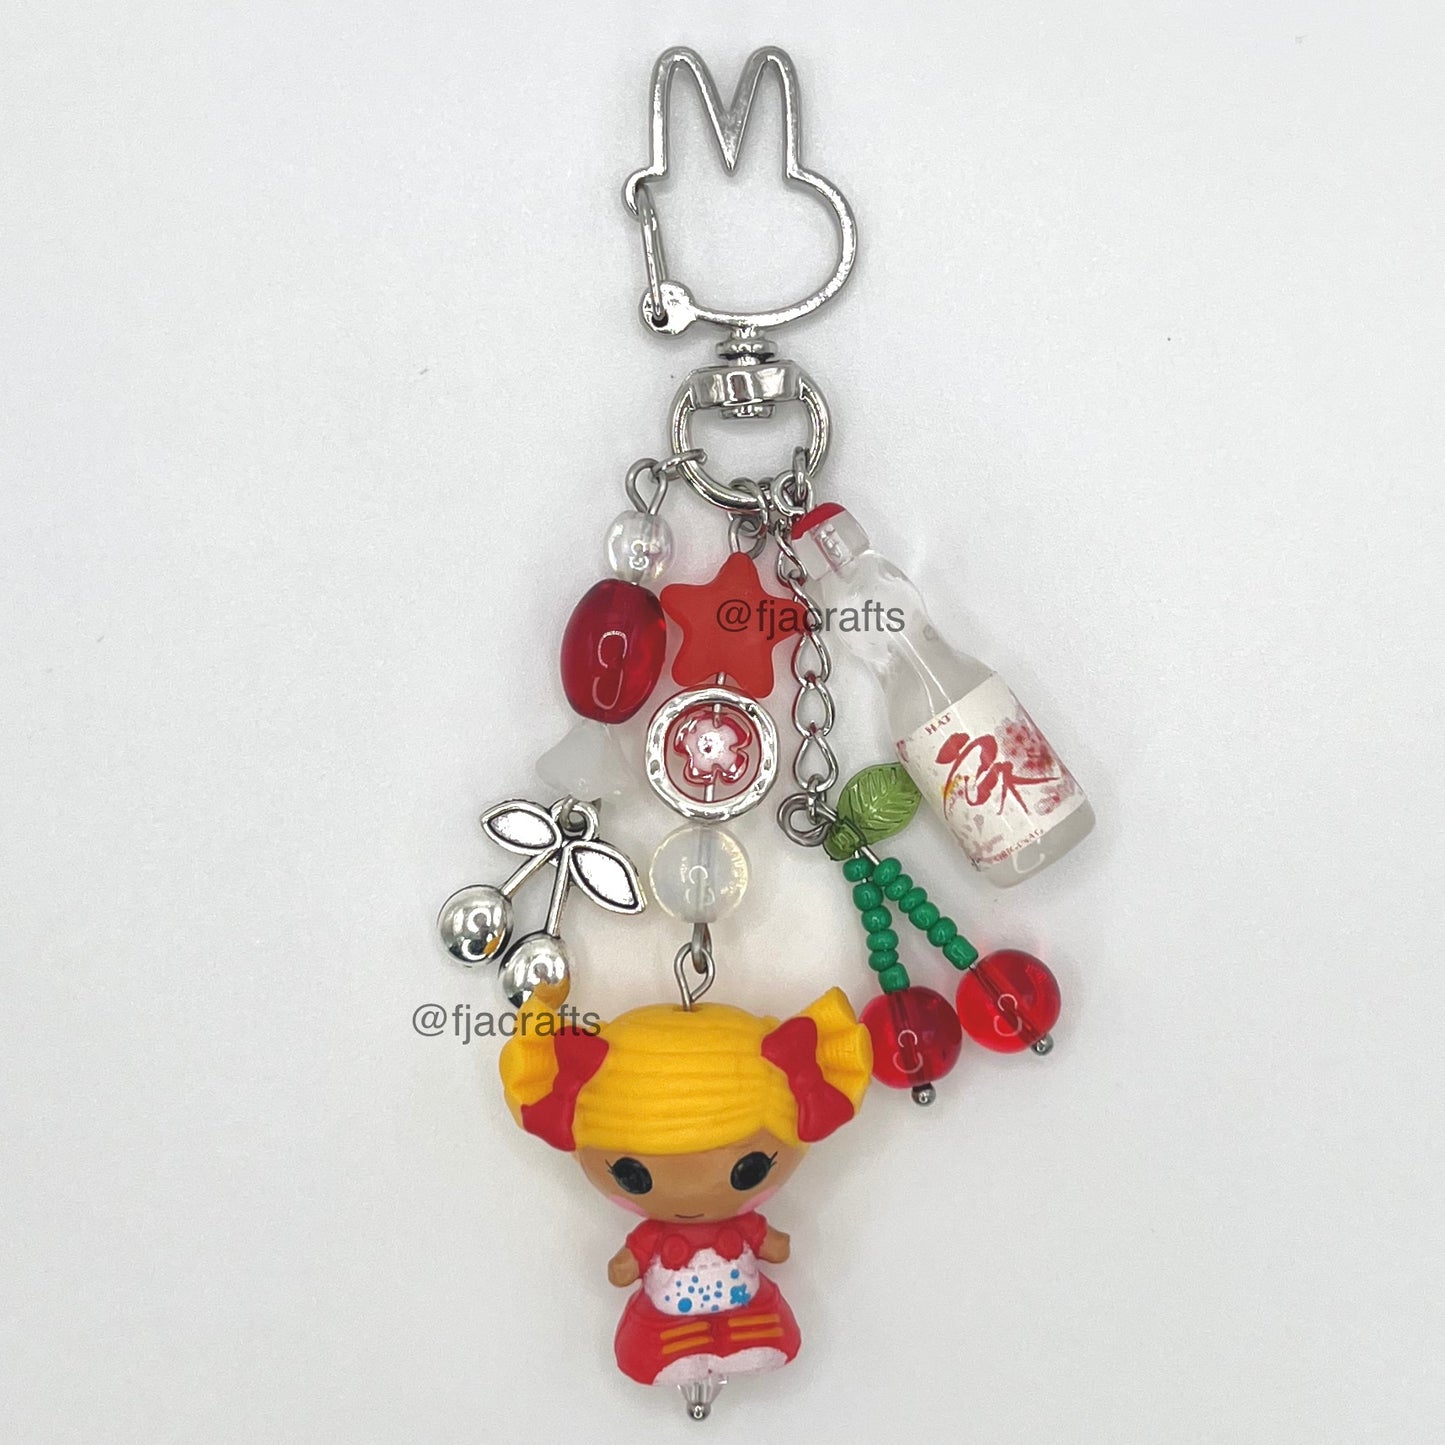 Loopsy Doll Beaded Keychain | kawaii, pink, yellow, red, Lala, buttons FJA Crafts